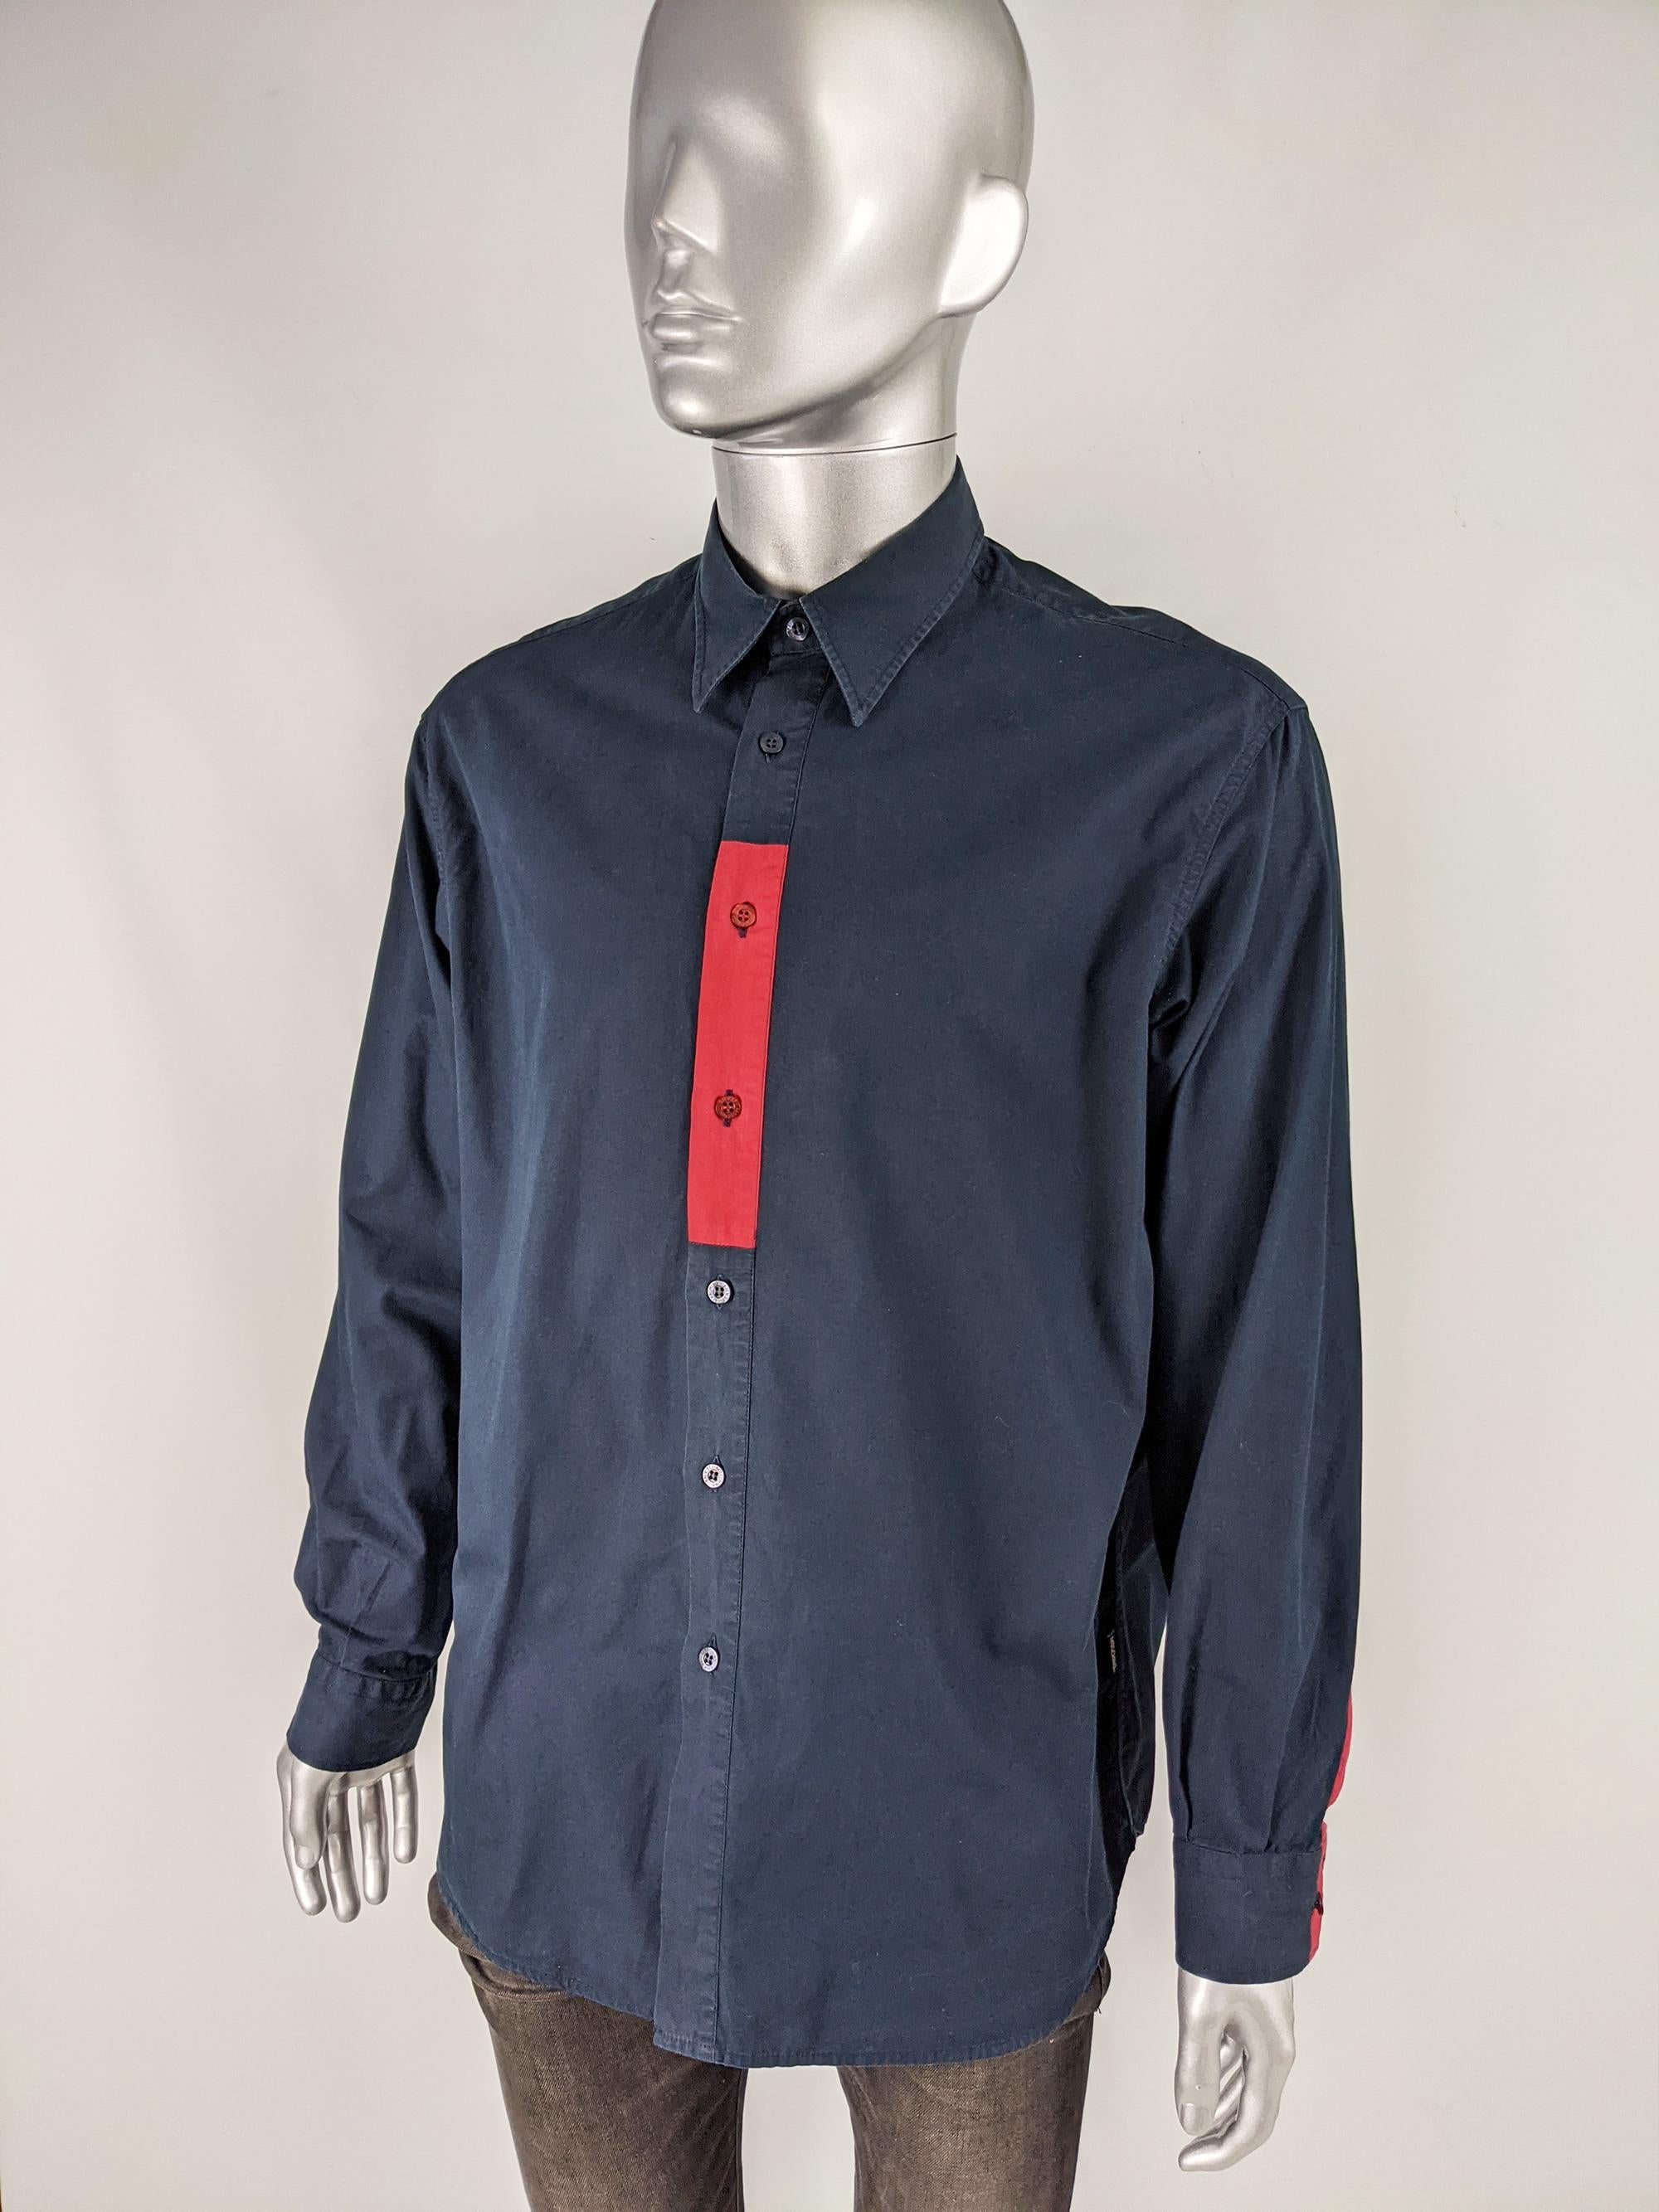 Moschino Vintage Navy Blue & Red Shirt 1990s Long Sleeve Shirt Buttoned Shirt In Fair Condition For Sale In Doncaster, South Yorkshire